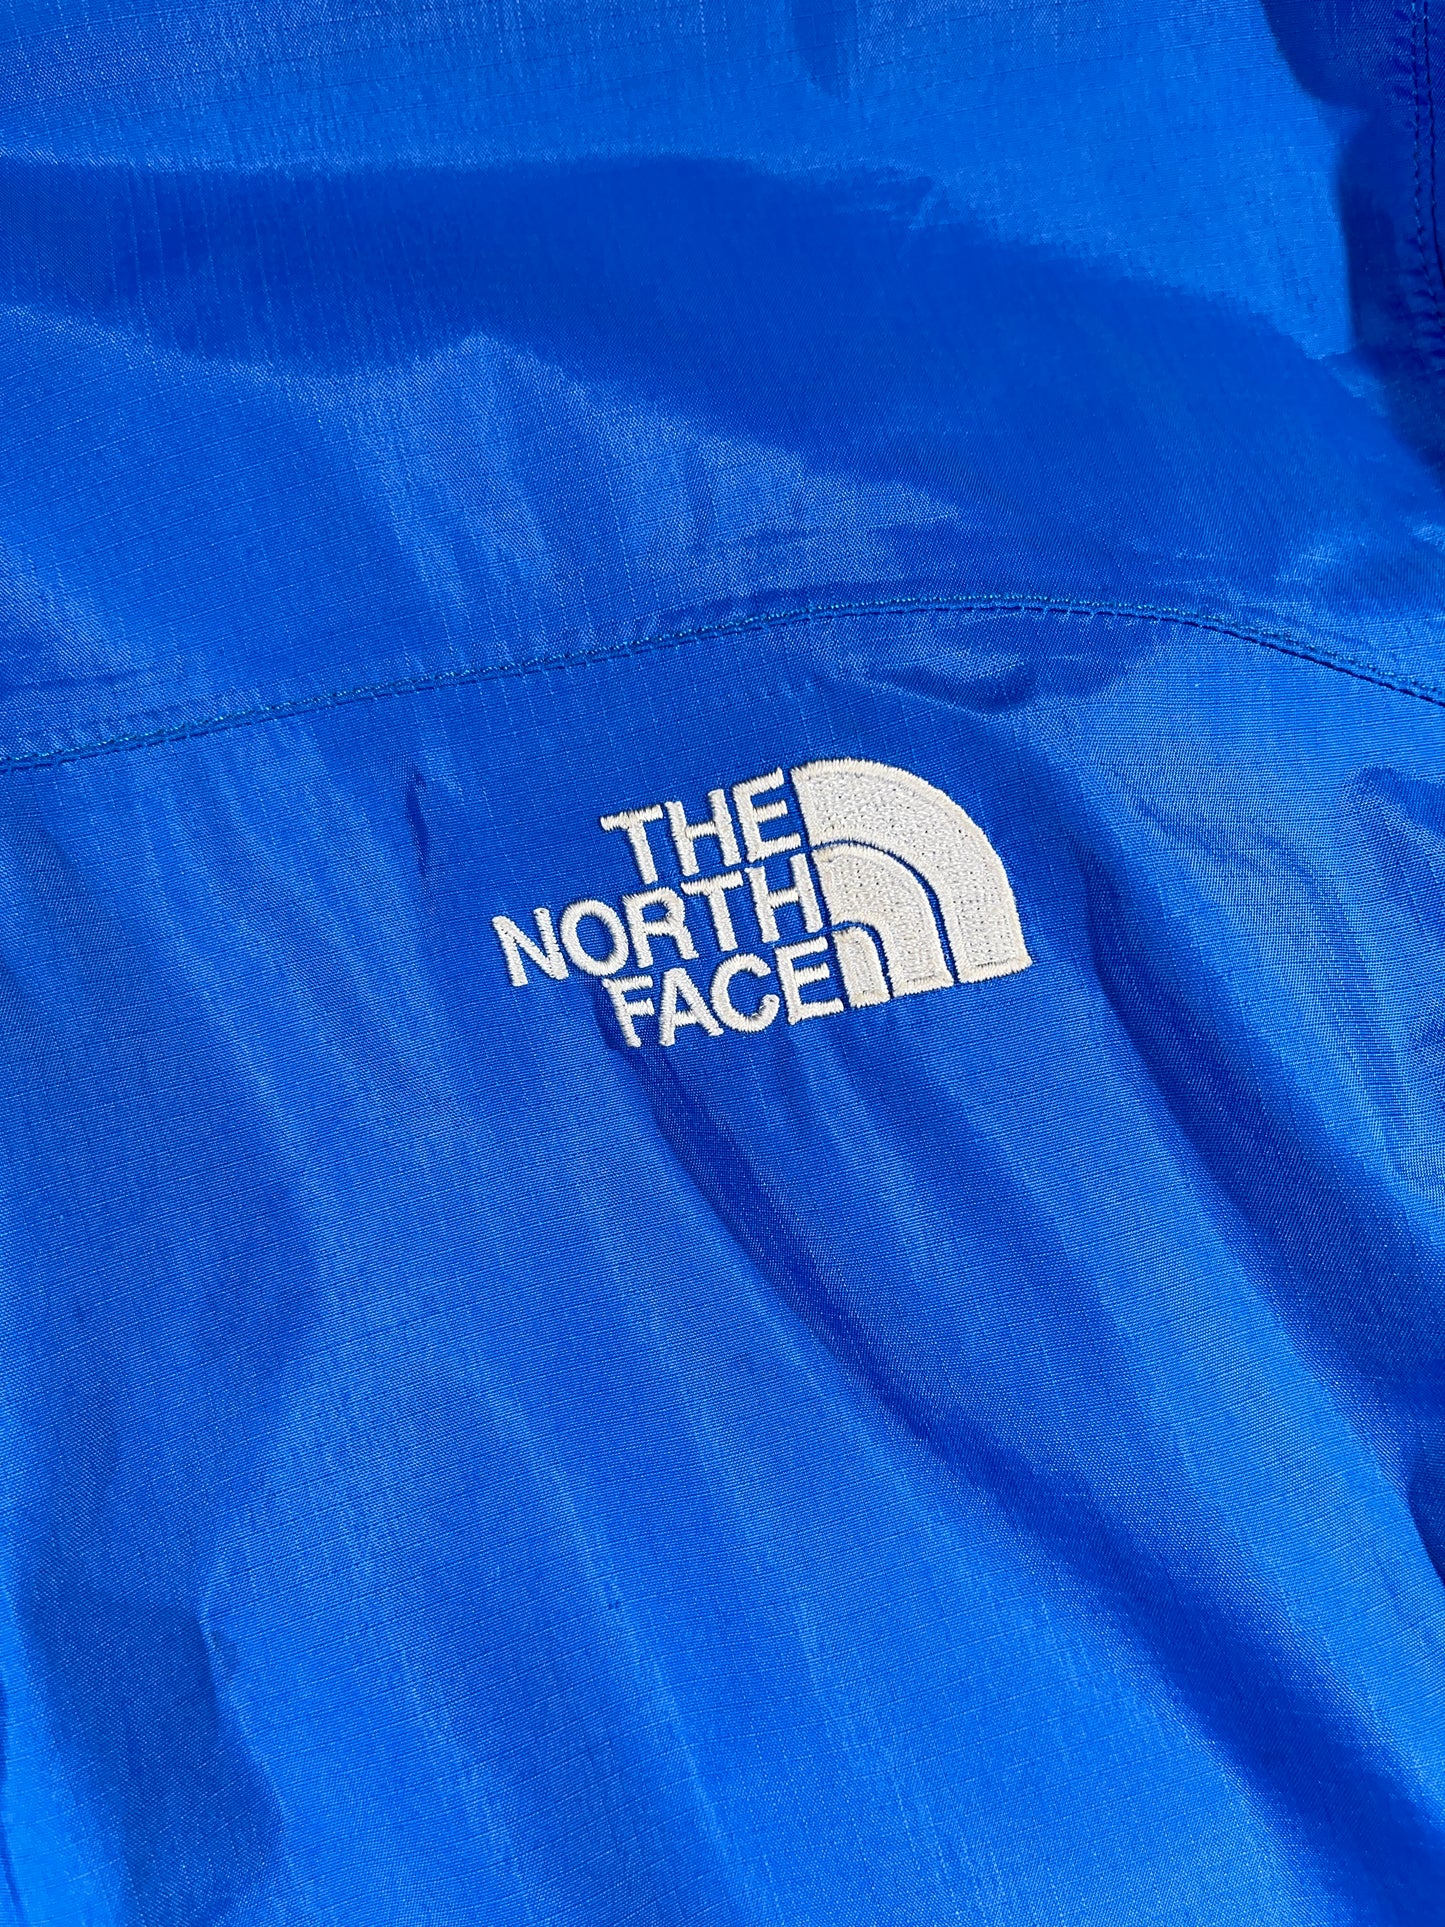 Vintage The North Face Jacket HyVent